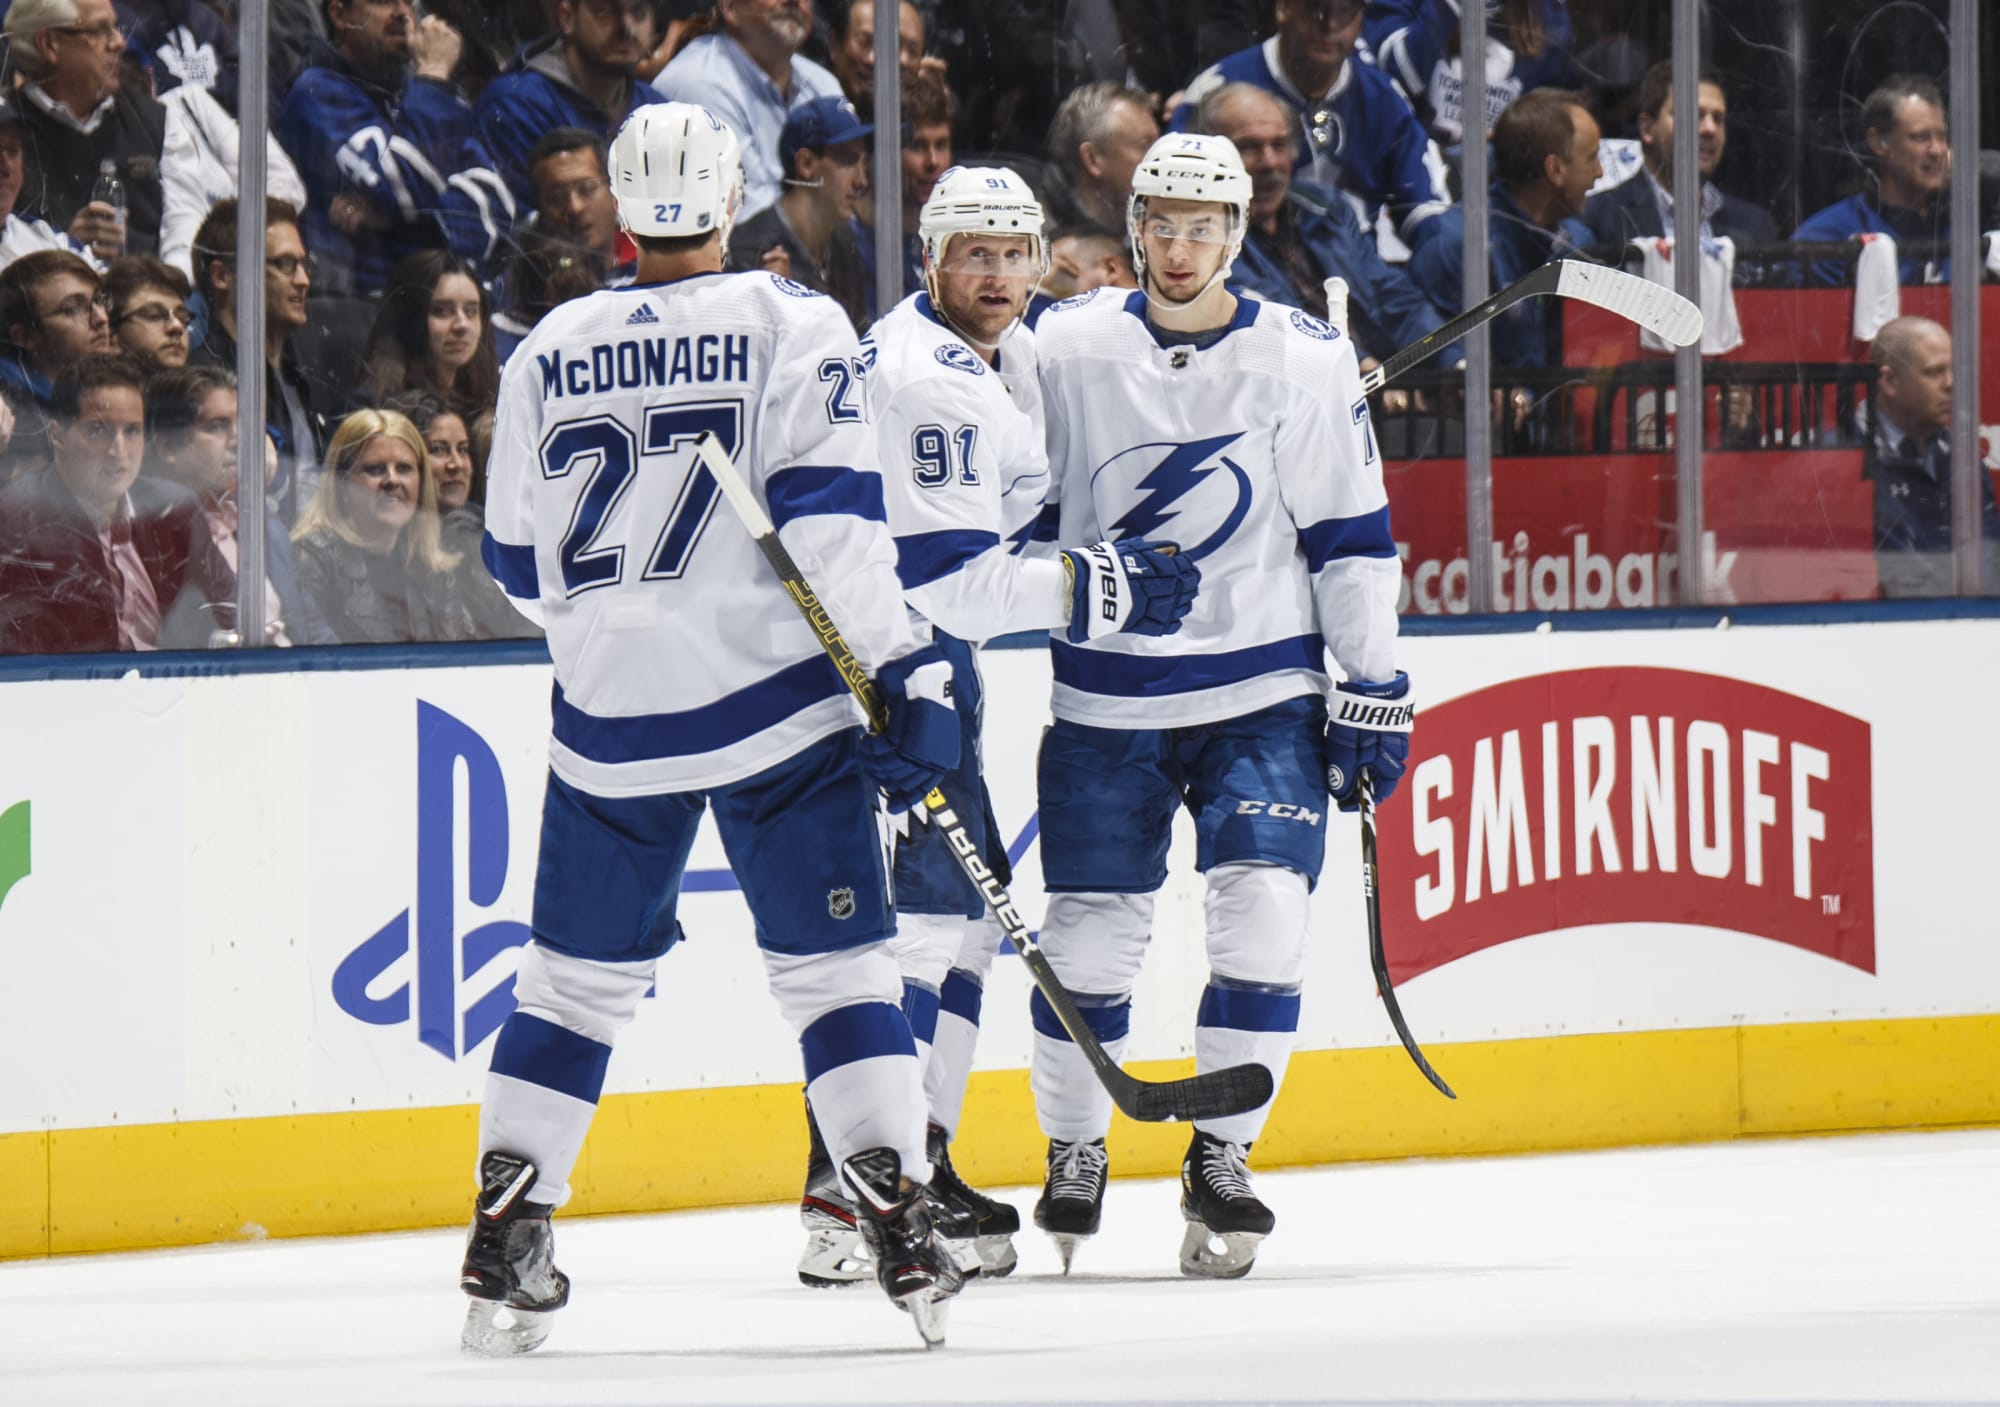 Tampa Bay Lightning scores 3 unanswered goals to defeat Maple Leafs